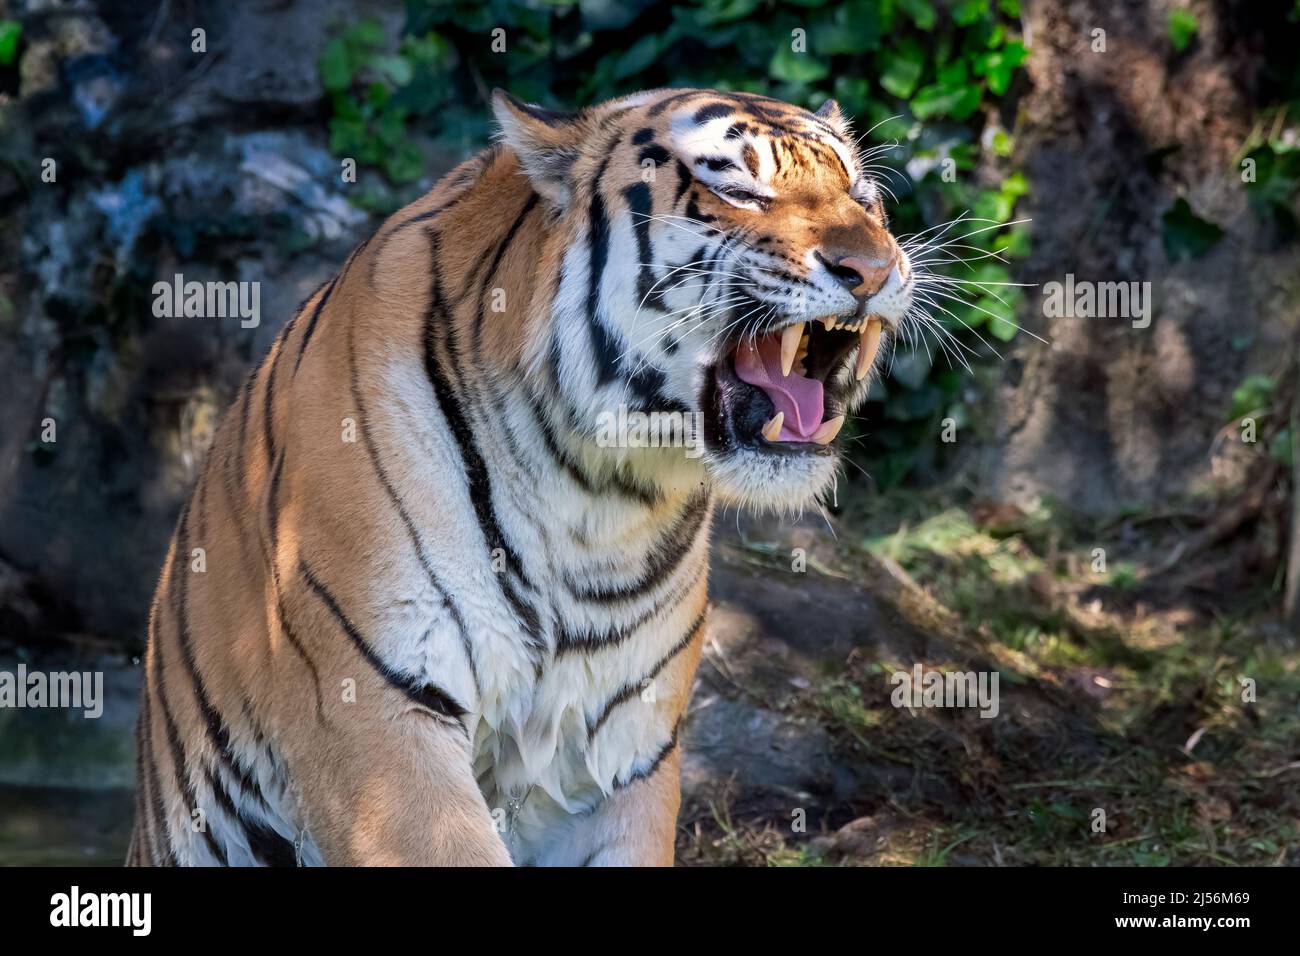 A snarling Tiger Stock Photo